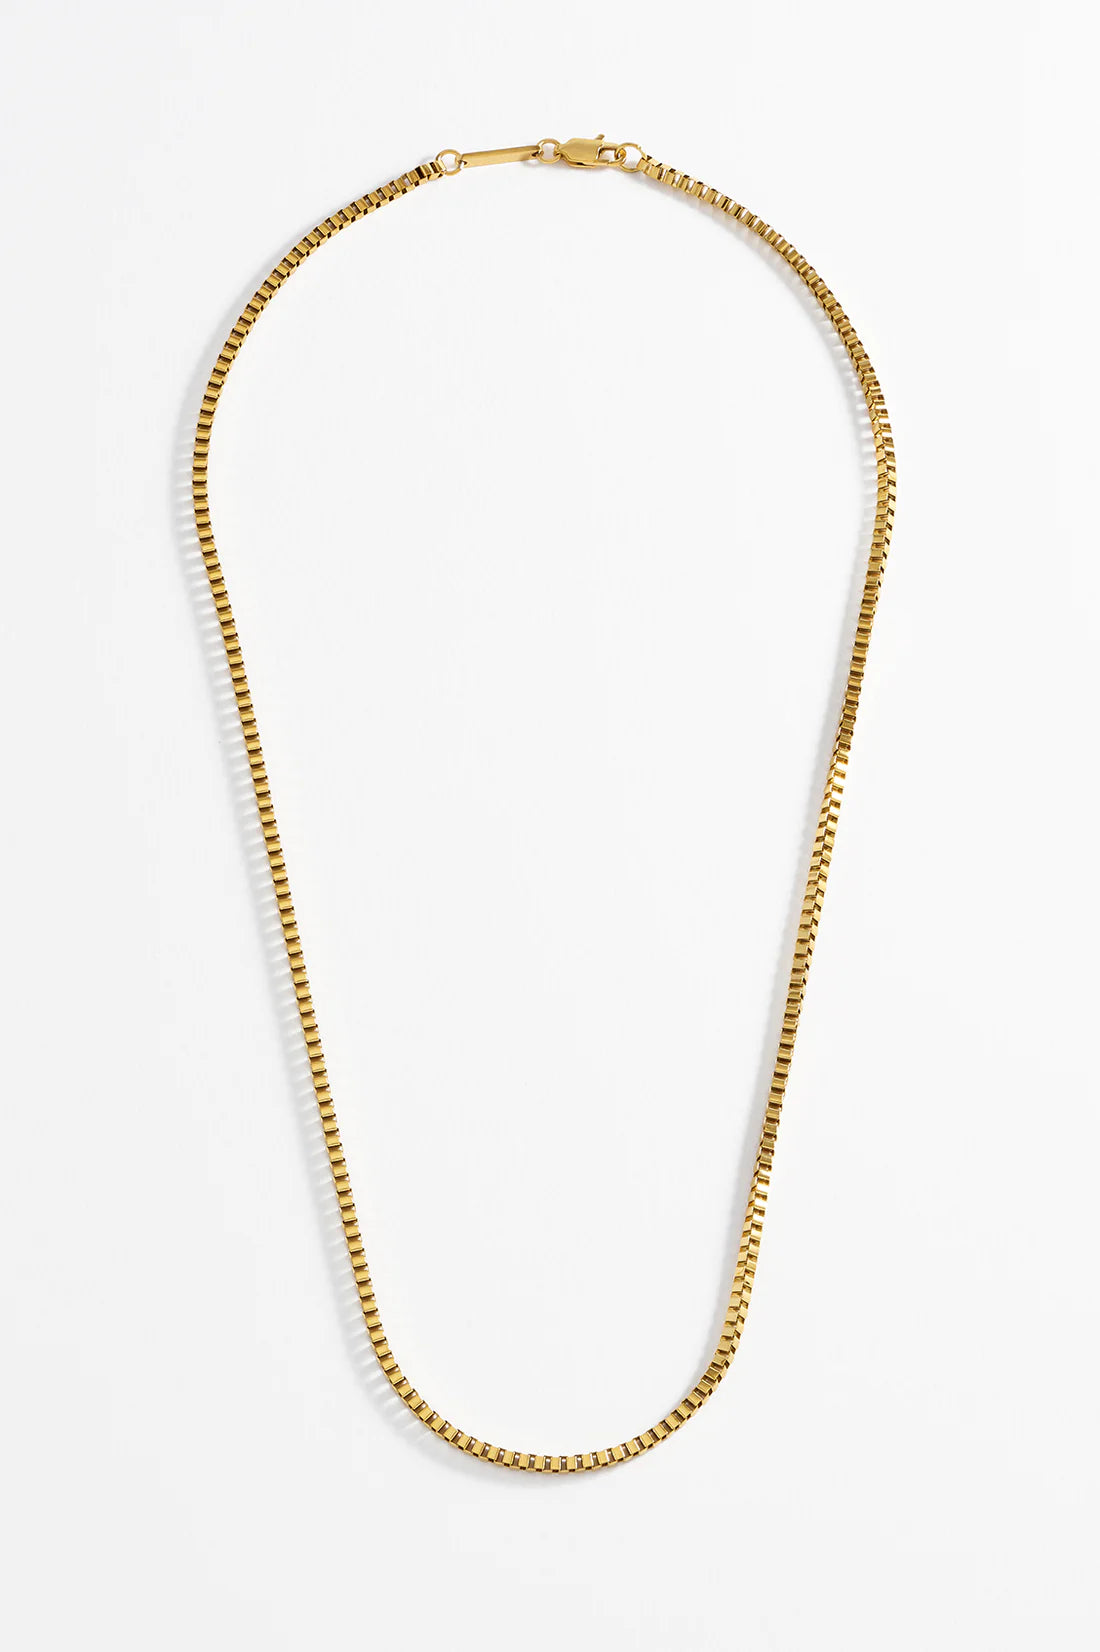 Box Chain Necklace- Gold